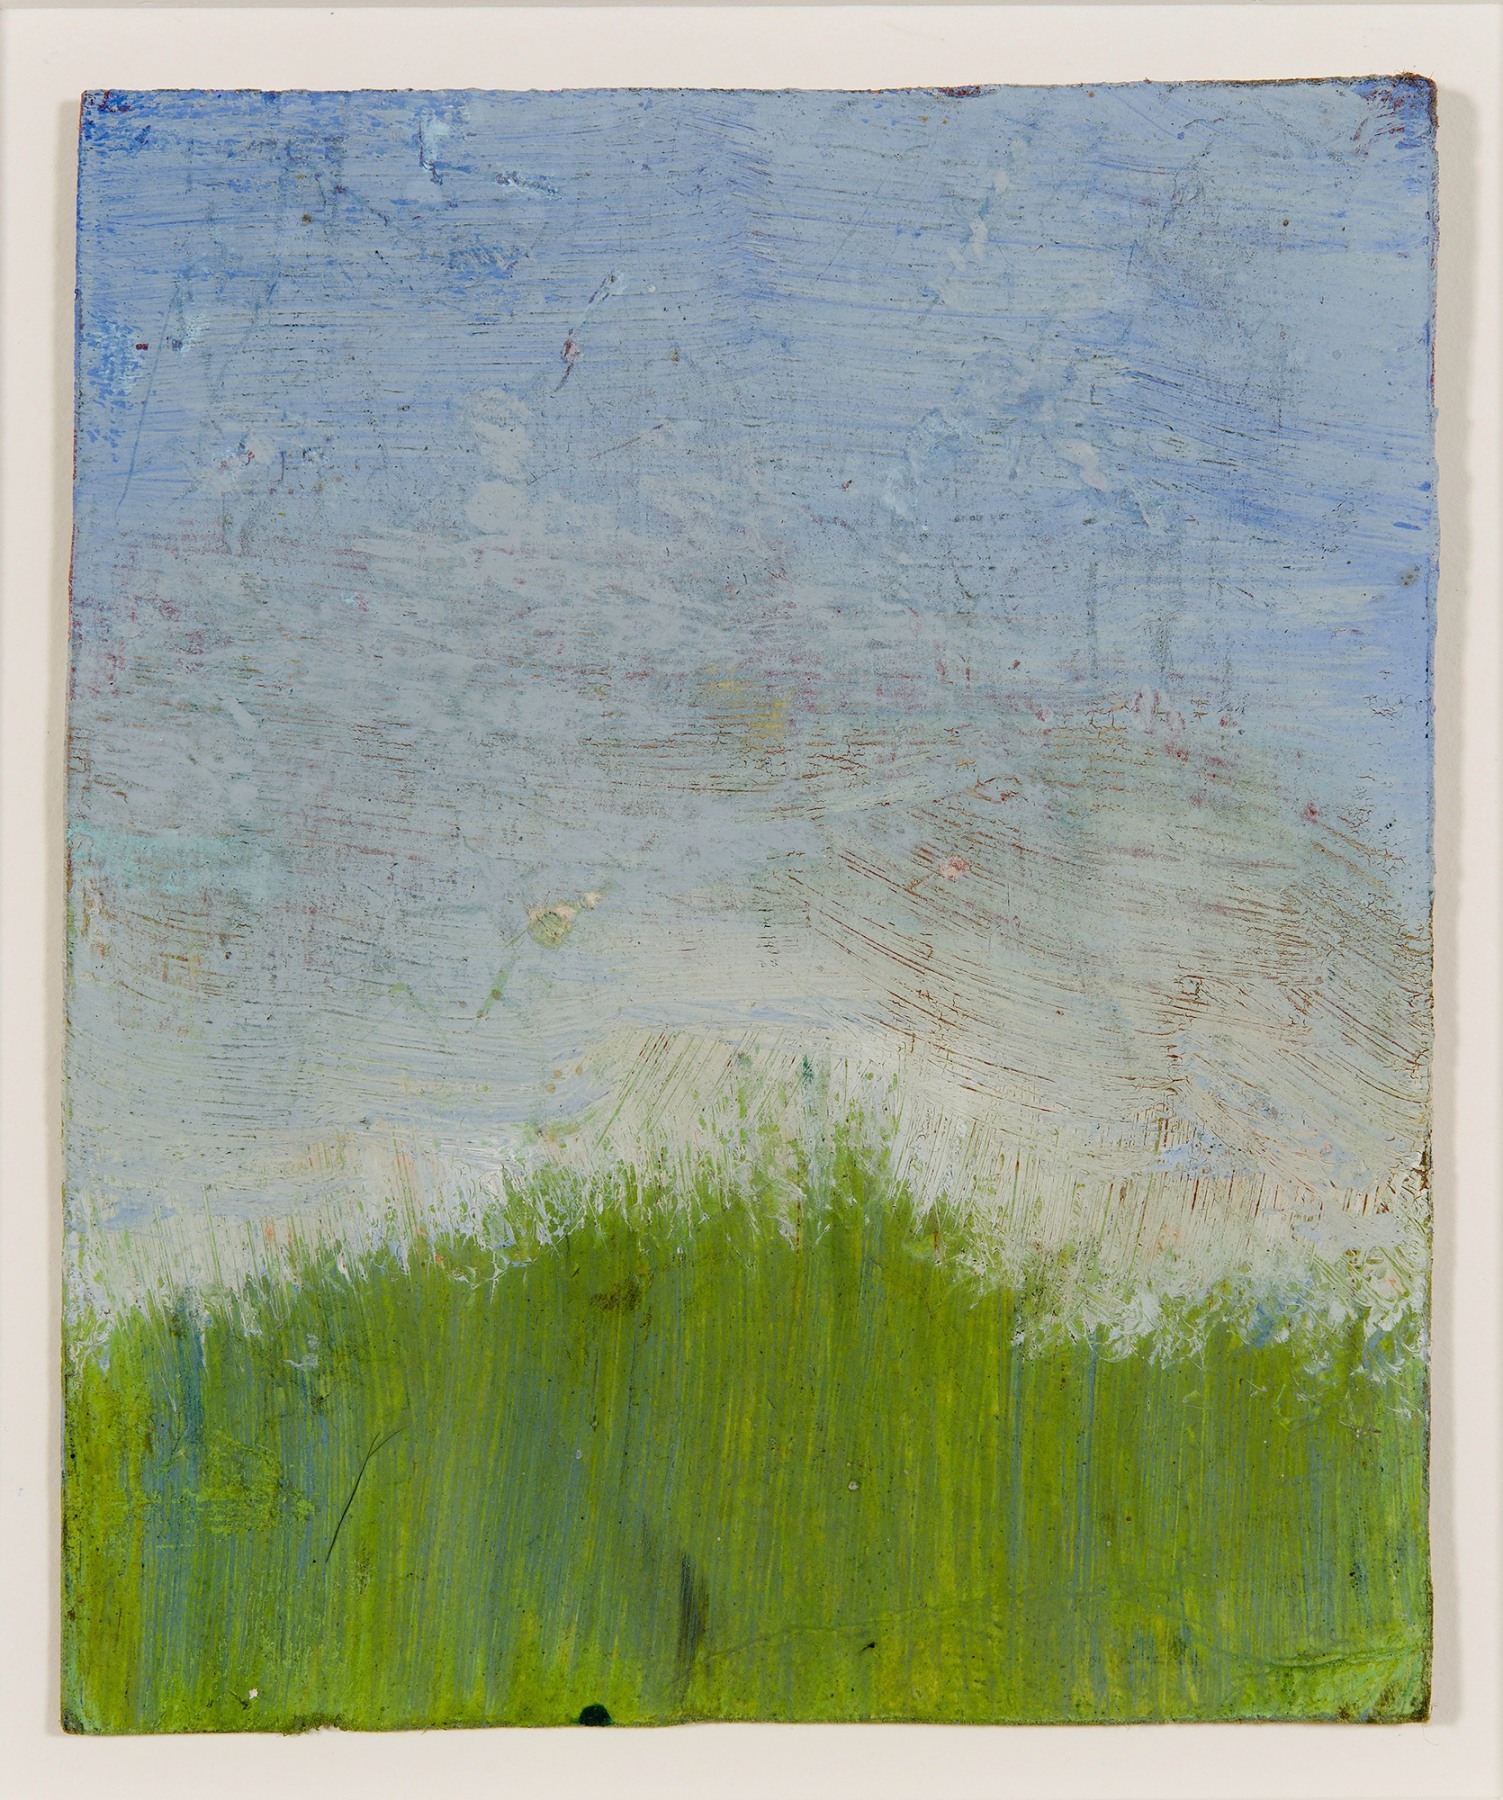 a landscape painting by Frank Walter of green grass and a pale blue sky